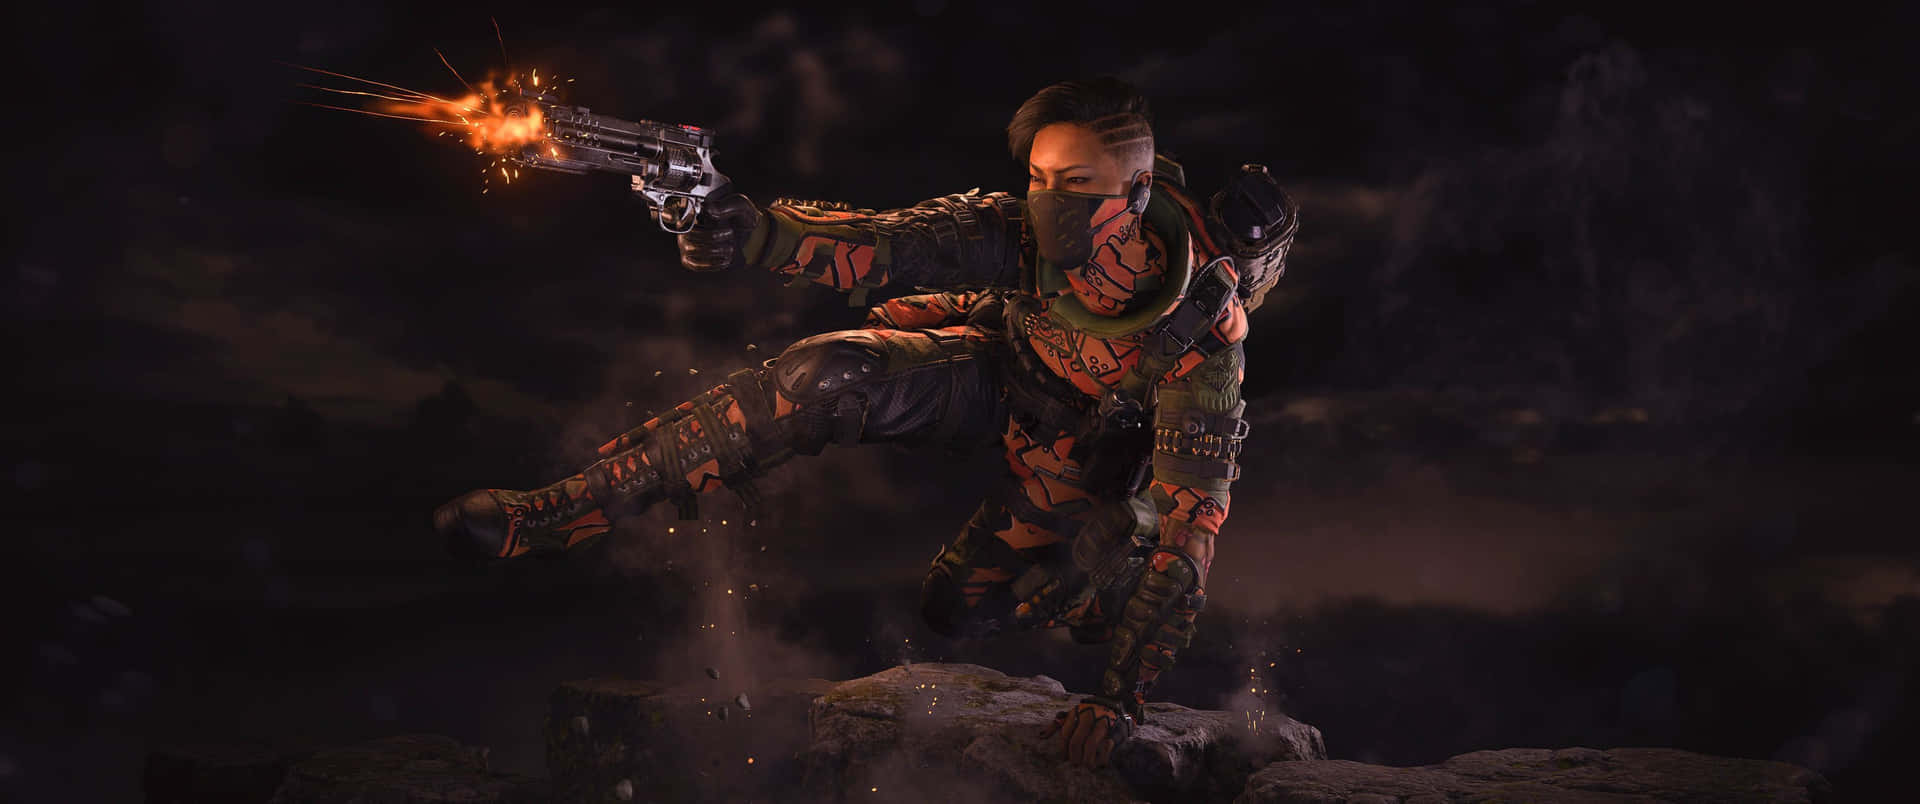 3440x1440 Game Call Of Duty: Black Ops 4 Background